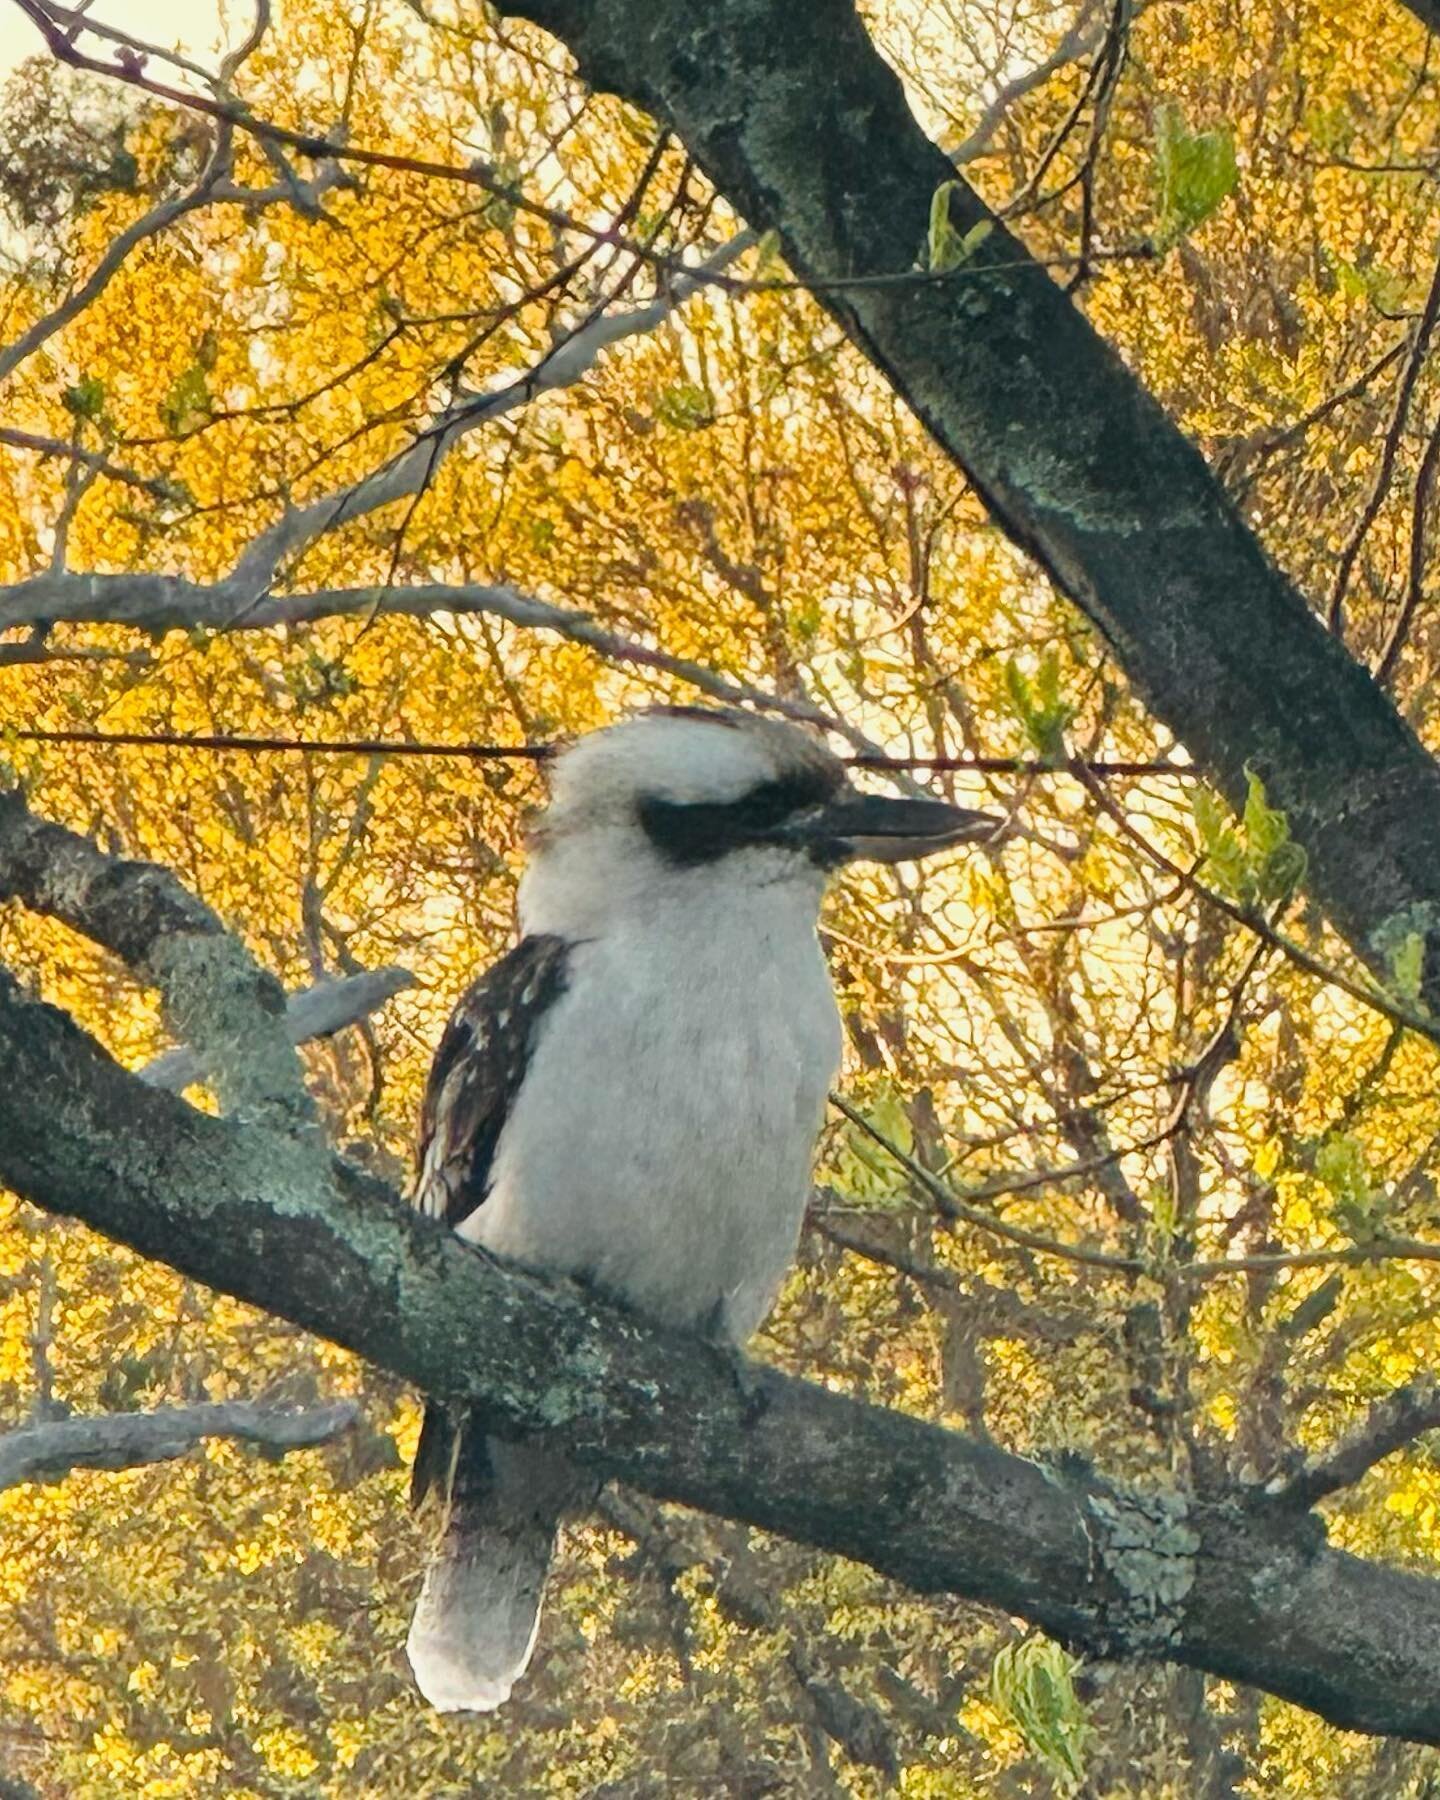 &ldquo;The secret path to happiness, peace, and fulfillment is living not just for yourself alone but for those you love.&rdquo;

-Kookaburra 

#lifeisshort 
#laughterisgoodforthesoul 
#donttakelifetooseriously 
#holdonpainends 
#animalwisdom